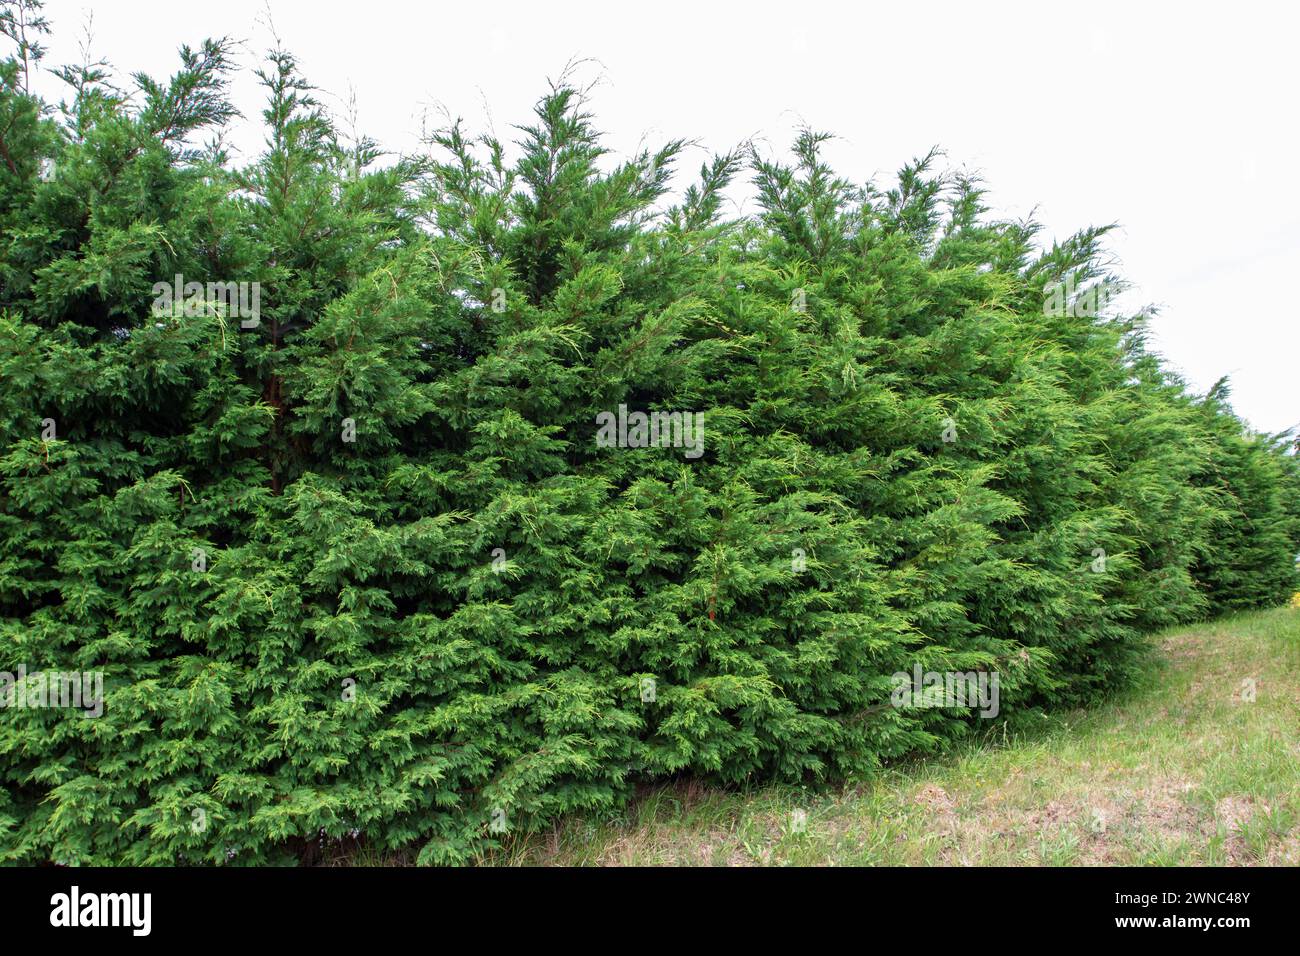 Thuja occidentalis or northern white-cedar or swamp cedar evergreen coniferous trees. Thuja ornamental plants in a row. Arborvitae low maintenance hed Stock Photo